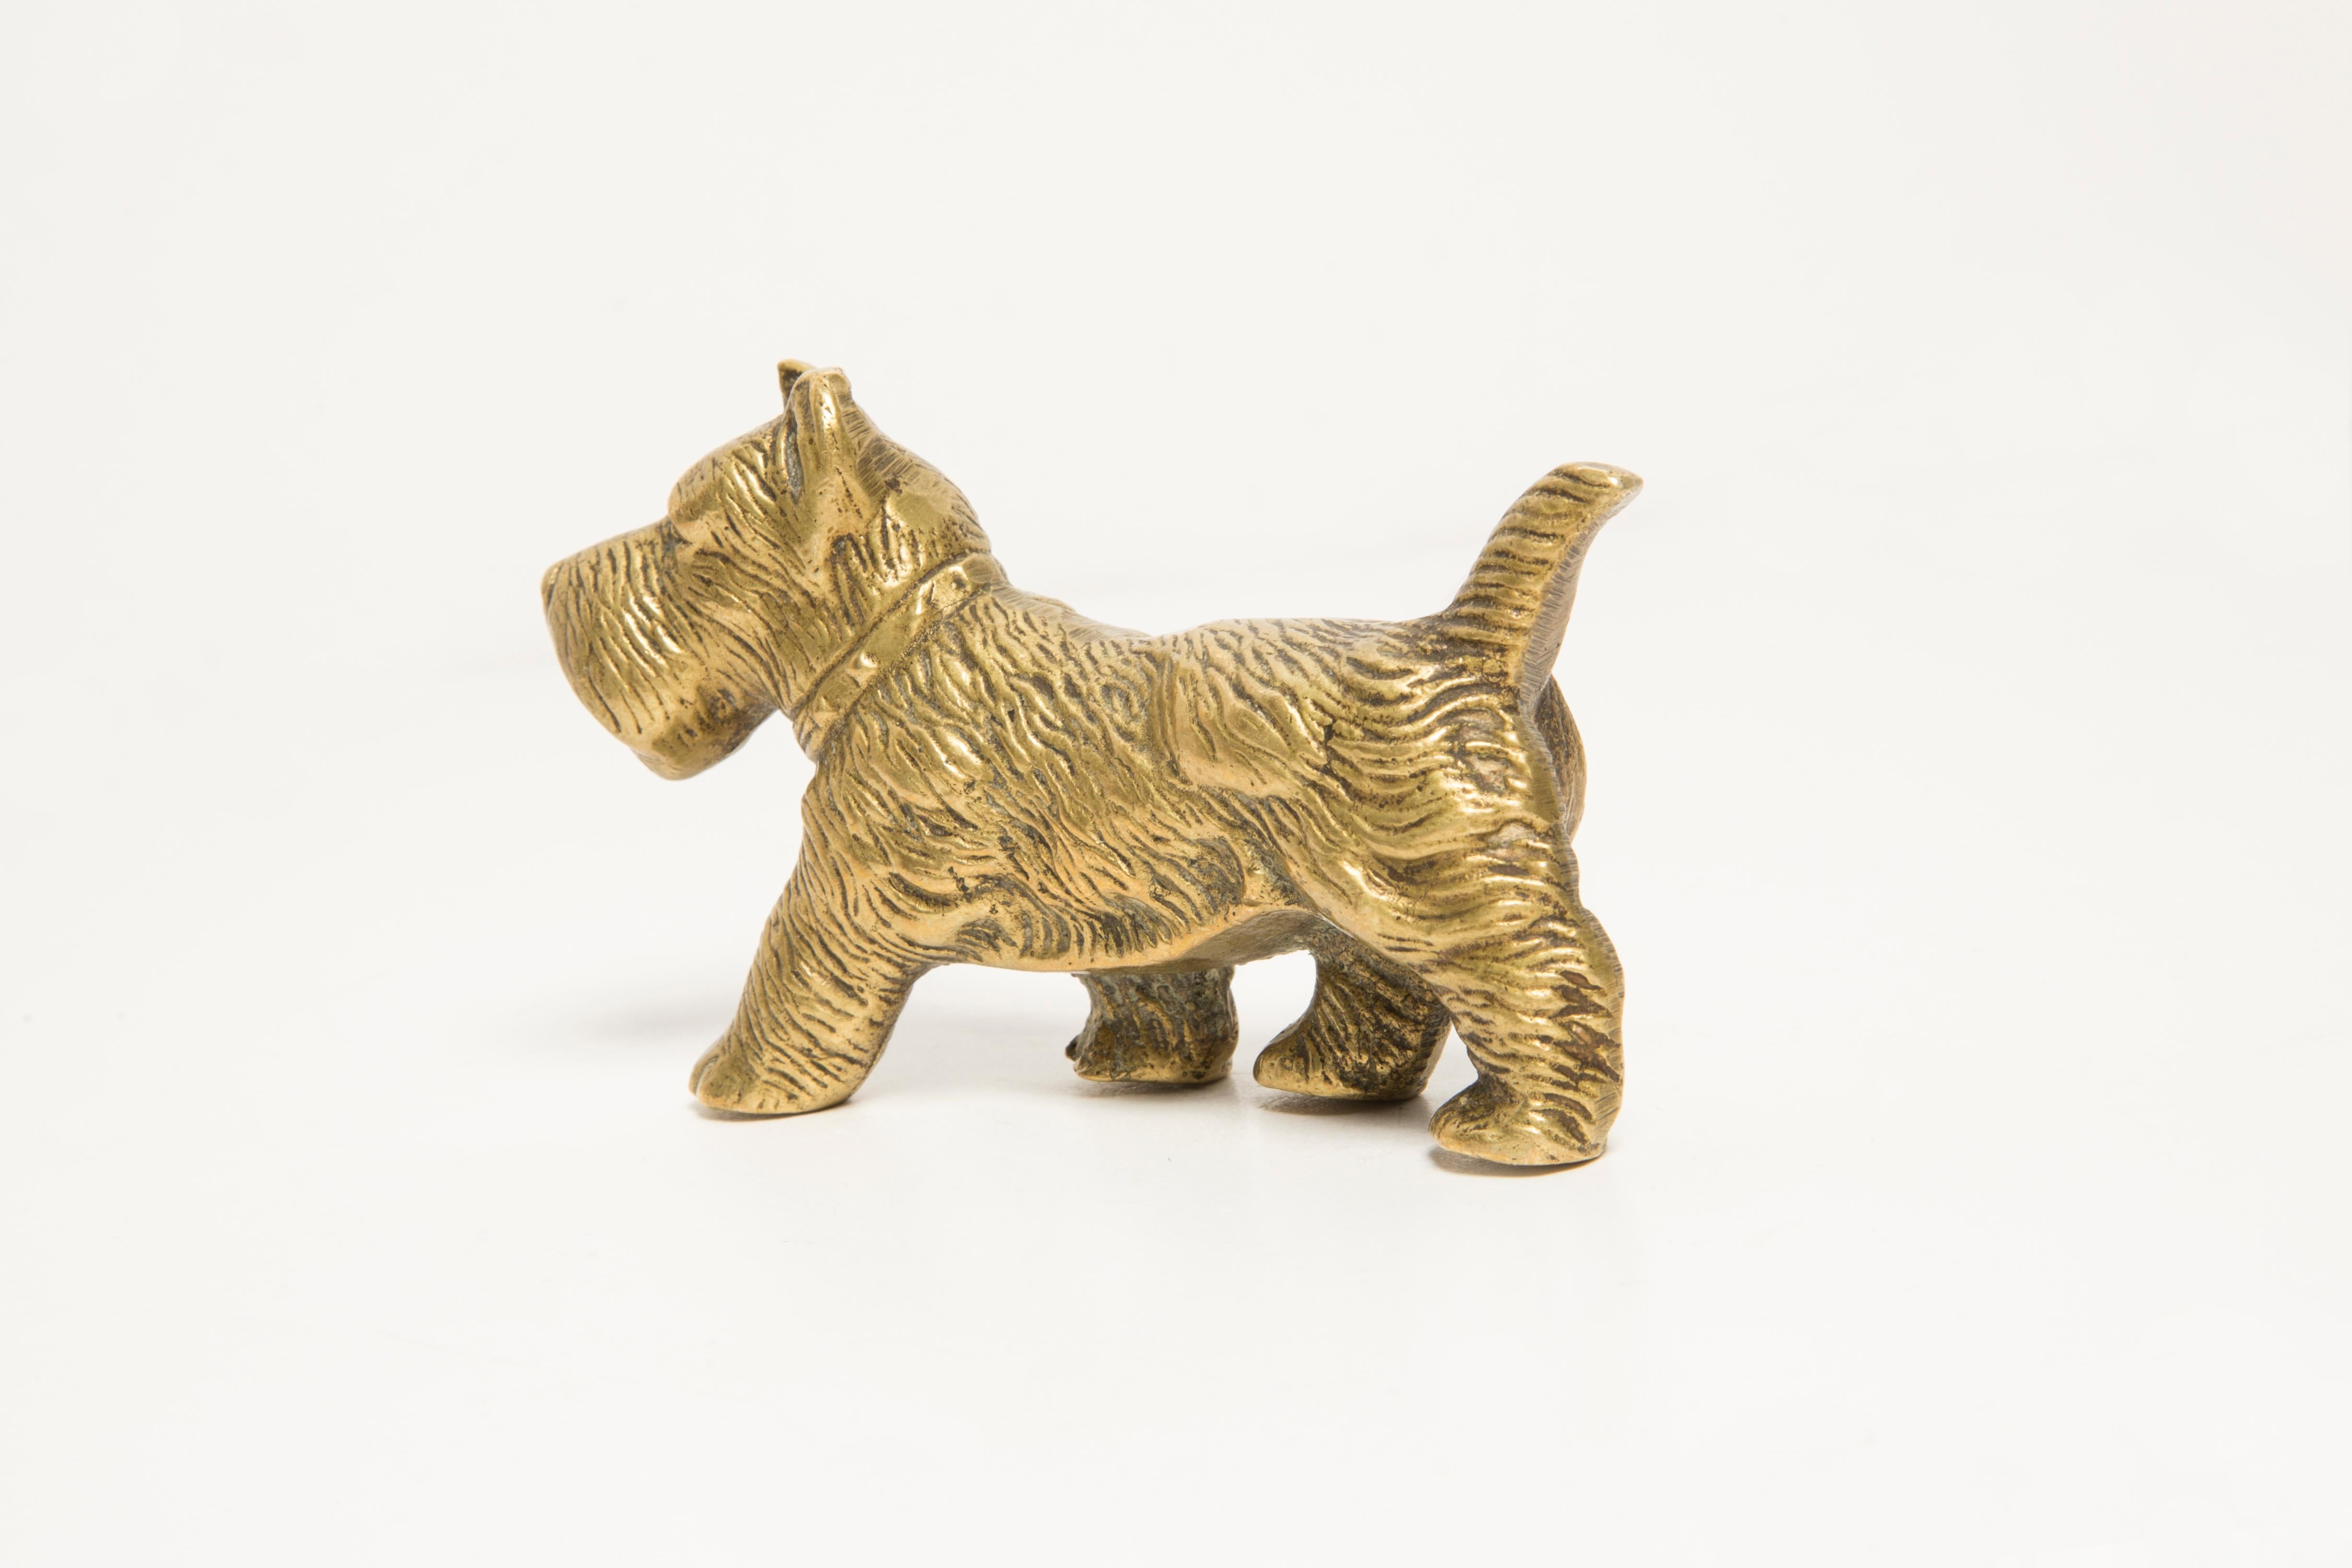 Midcentury West Terrier Dog Gold Metal Decorative Sculpture, Italy, 1950s For Sale 4